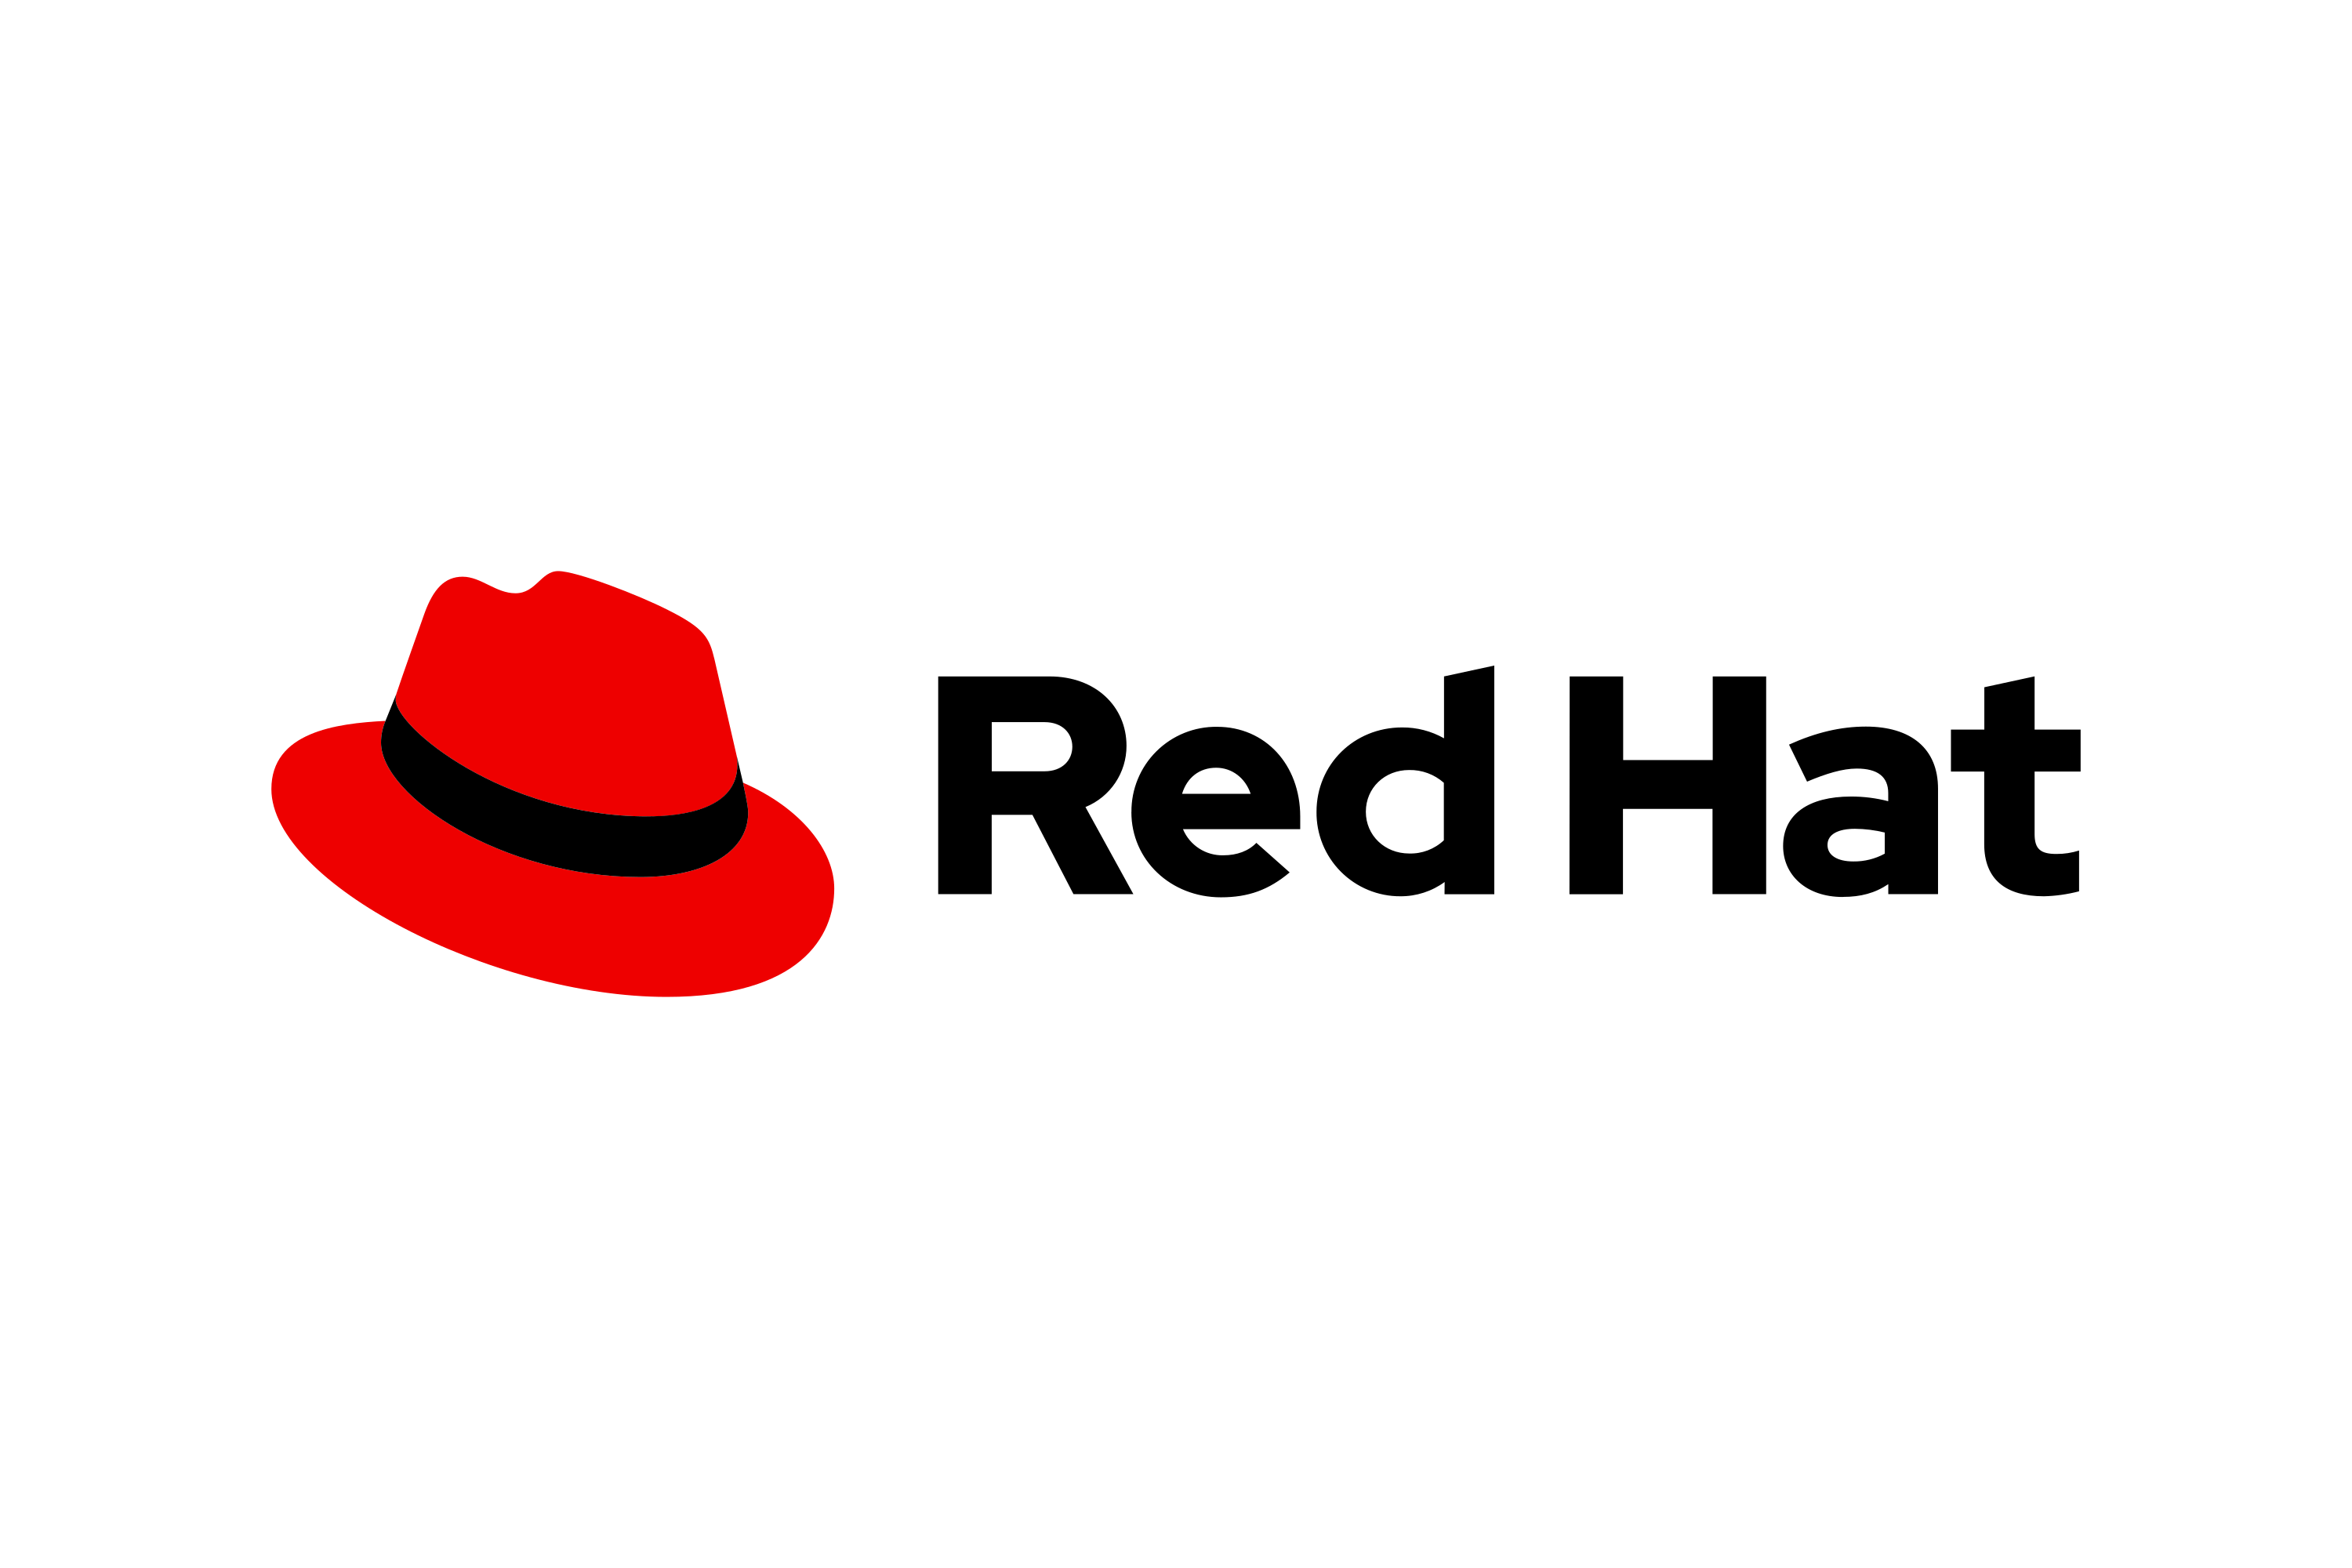 Red_Hat